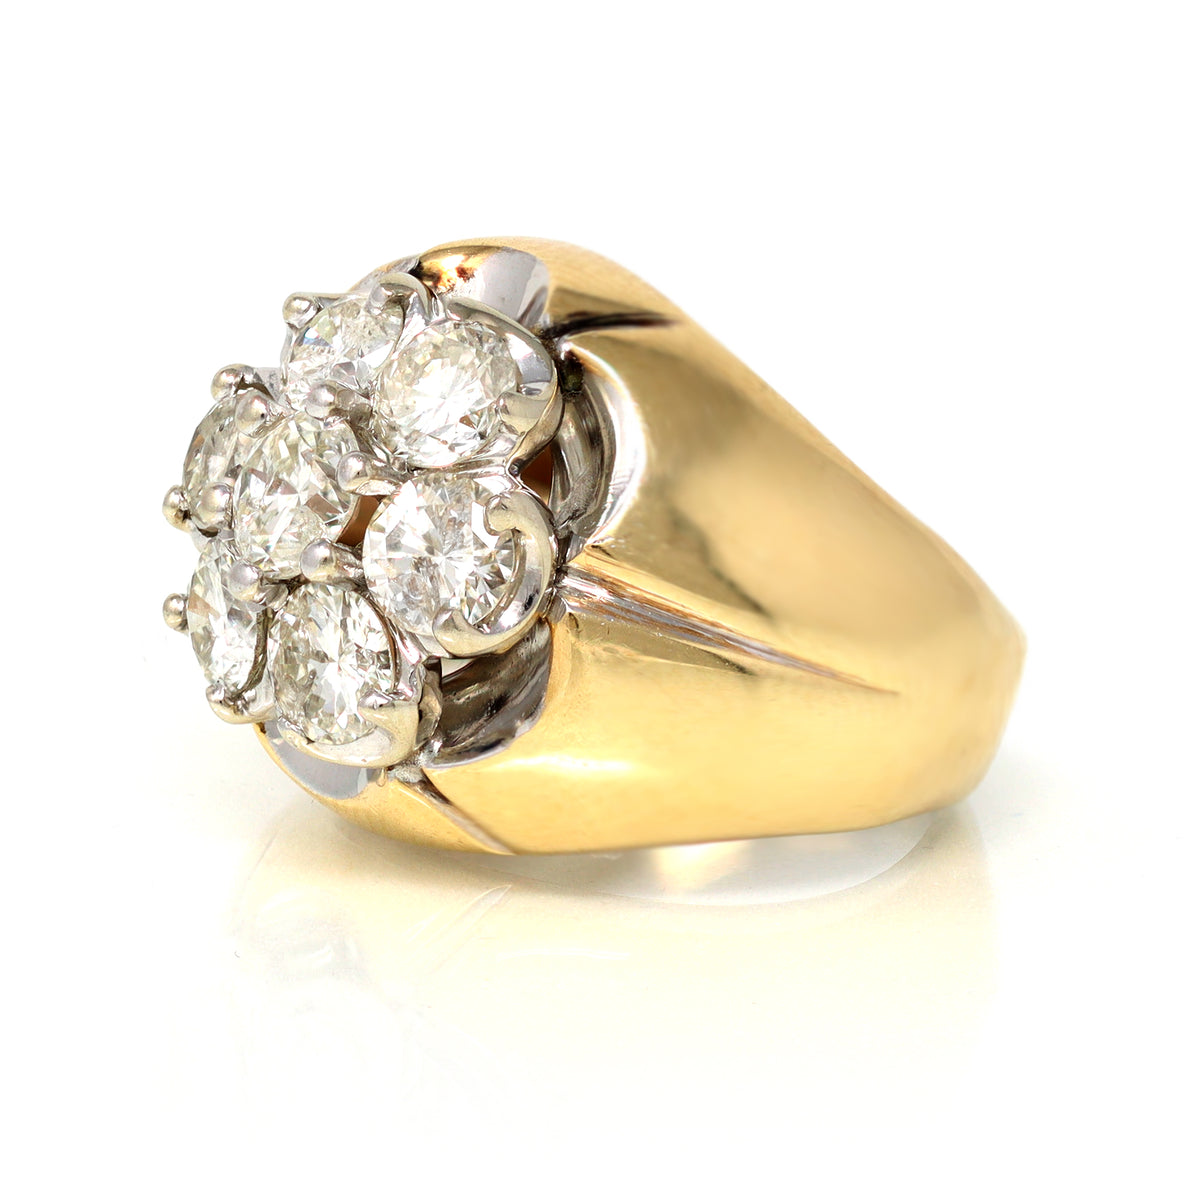 Rosette diamond cocktail ring set in 14 karat yellow gold angle view